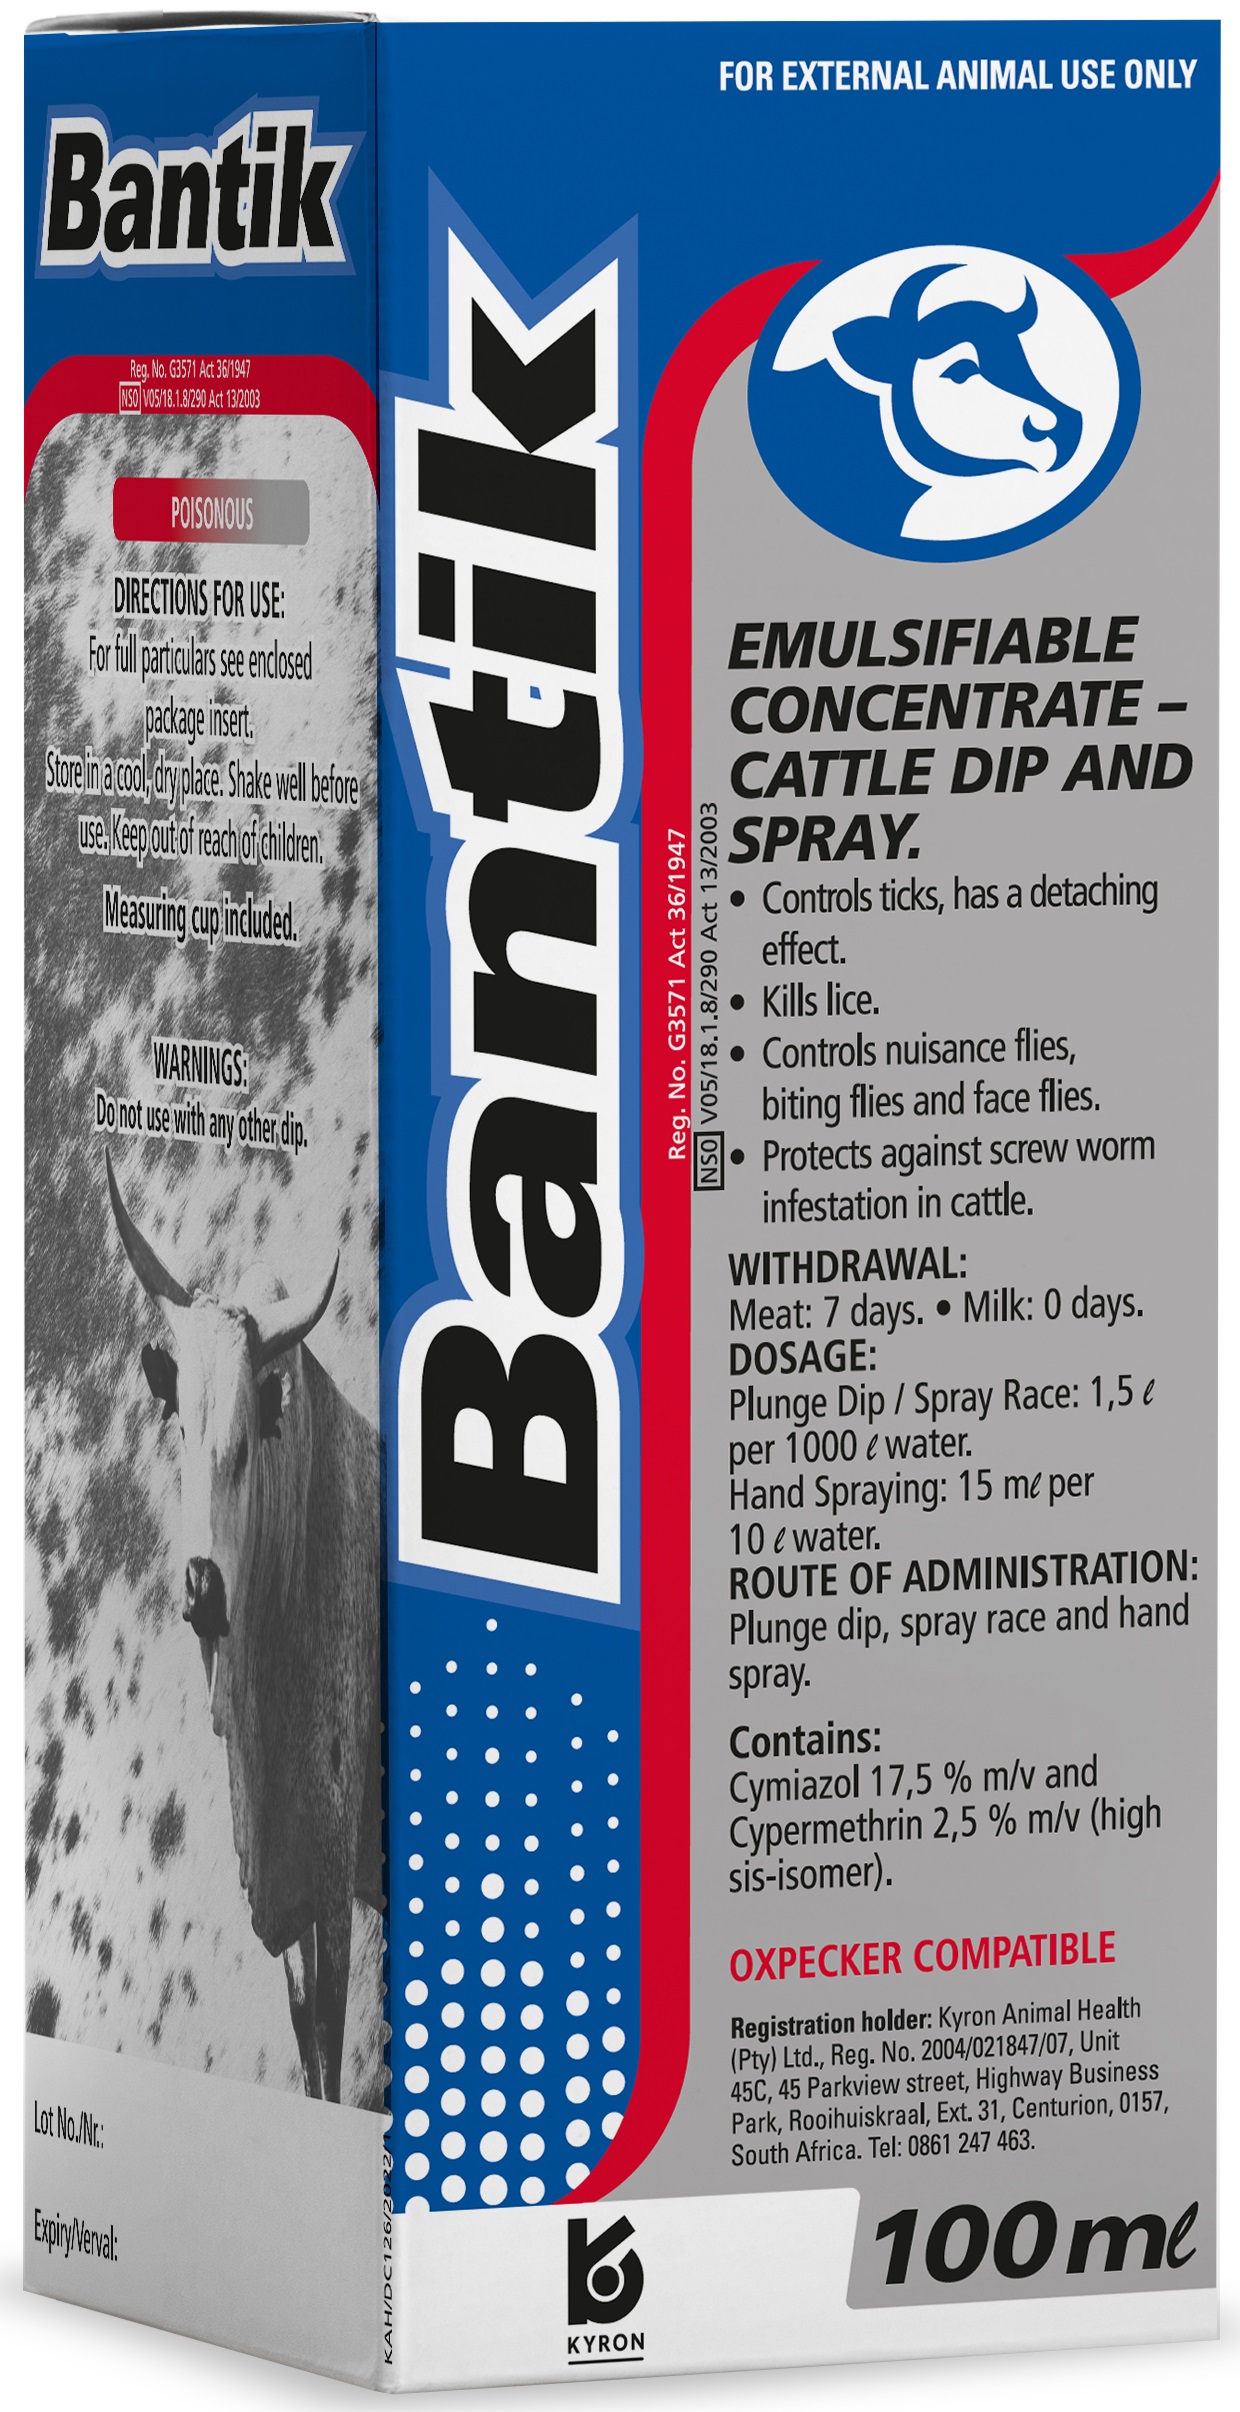 Emulsifiable concentrate that controls ticks, kills lice, controls nuisance-, biting- and face flies and protects against screw-worm infestations in cattle.